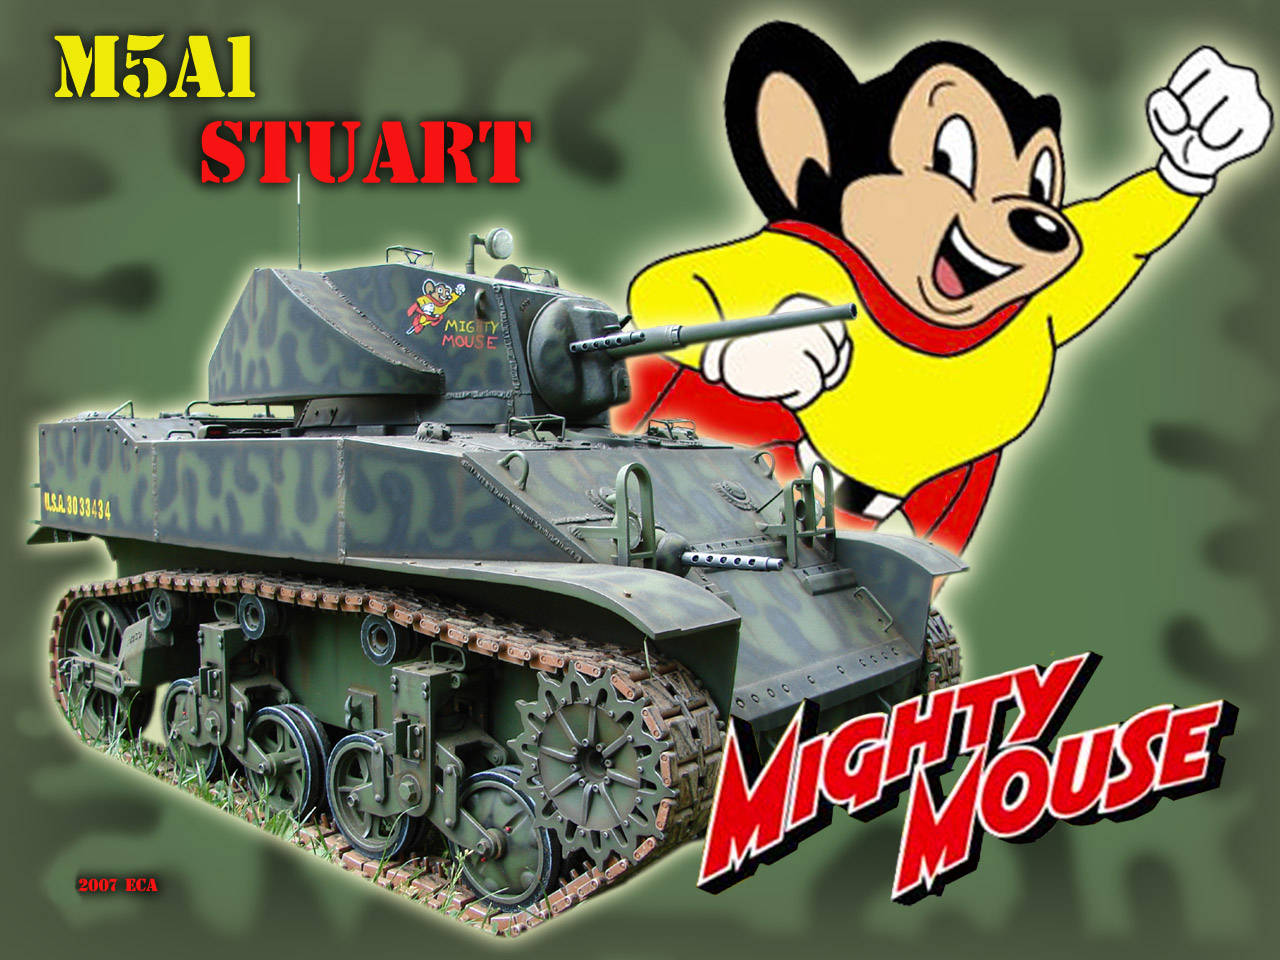 Mighty Mouse With M5A1 Stuart Wallpaper